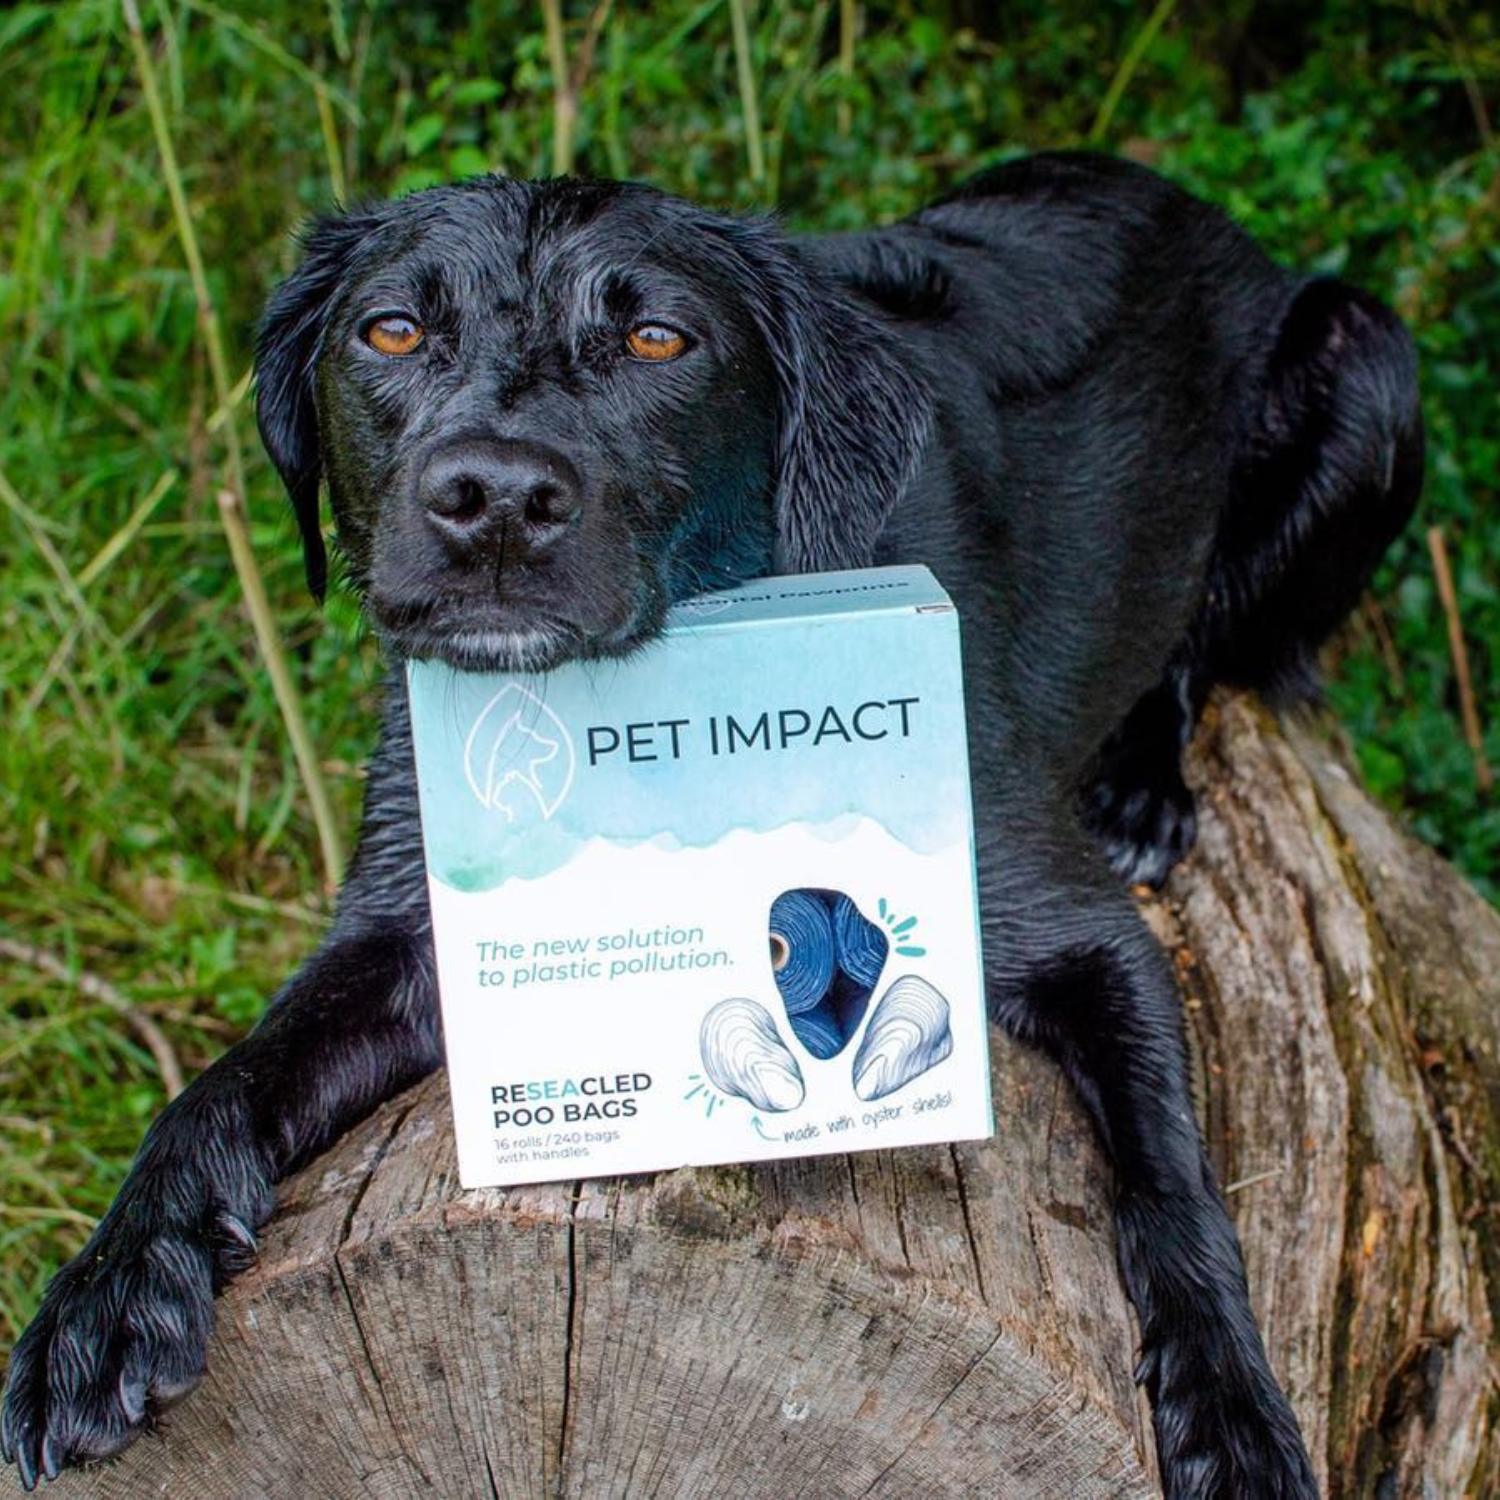 A black dog sat on a log, with their head resting on a box of reseacled poo bags